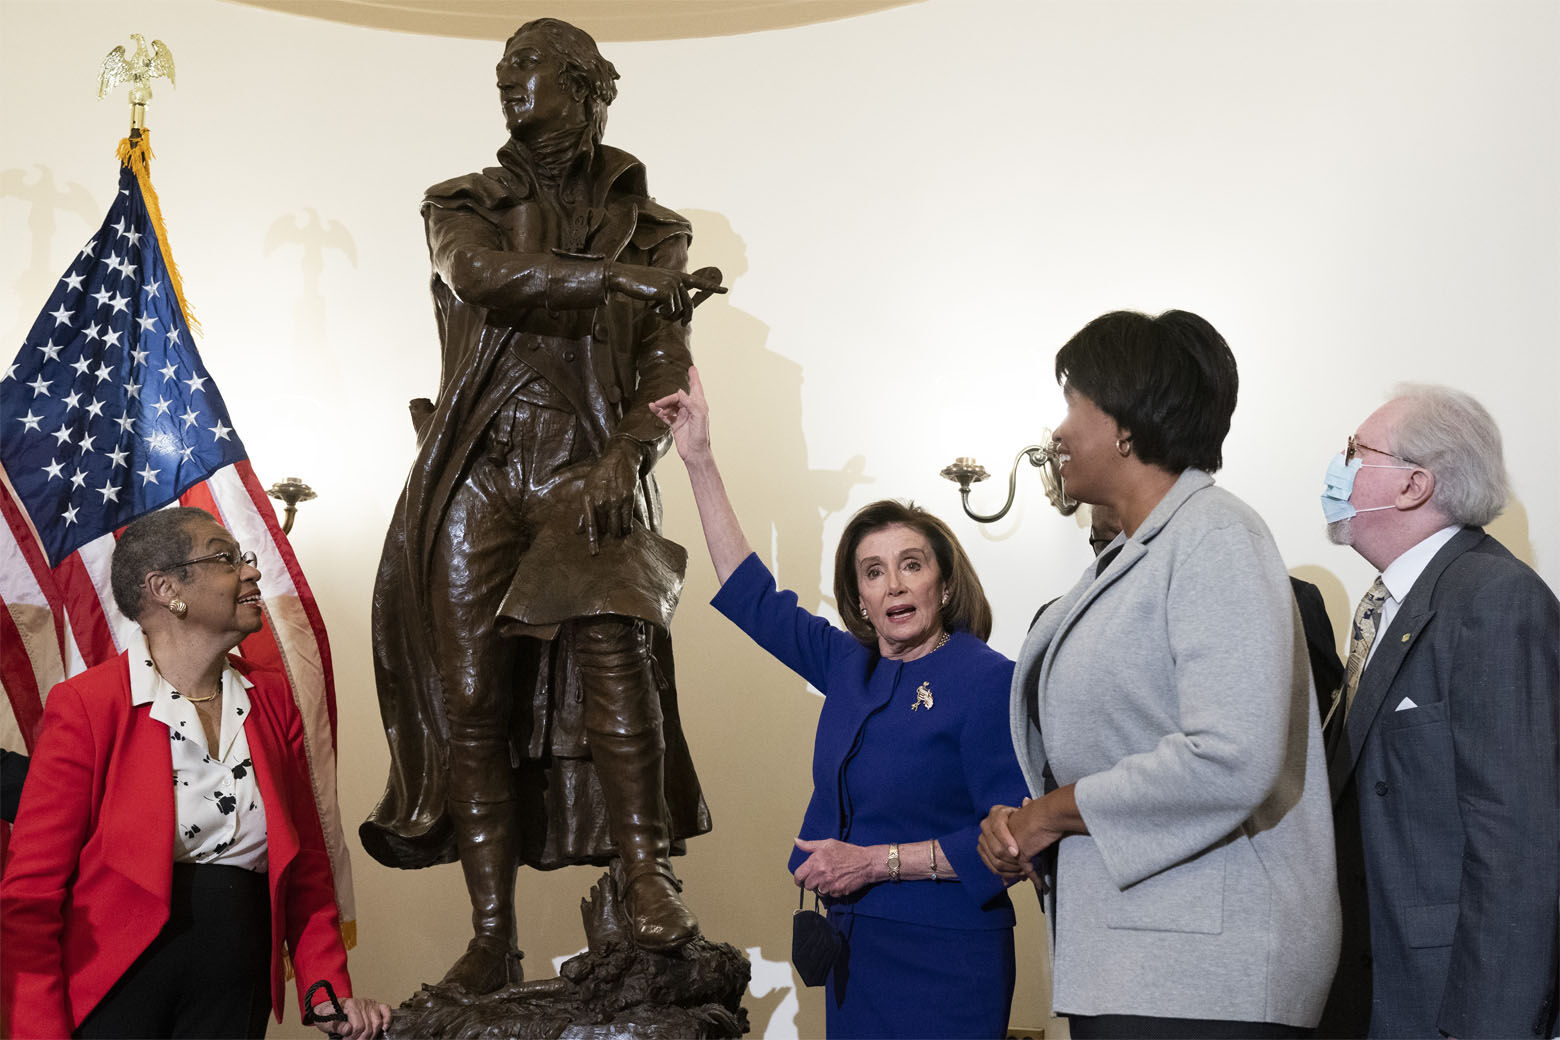 Speaker of the House Nancy Pelosi of Calif., points to new statue of Pierre L'Enfant, during a ceremony unveiling the statue, Monday, Feb. 28, 2022, at the Capitol in Washington. With her are Del. Eleanor Holmes Norton, D-D.C., left, District of Columbia Mayor Muriel Bowser, and artist Gordon Kray, far right, who sculpted the statue. (AP Photo/Jacquelyn Martin)